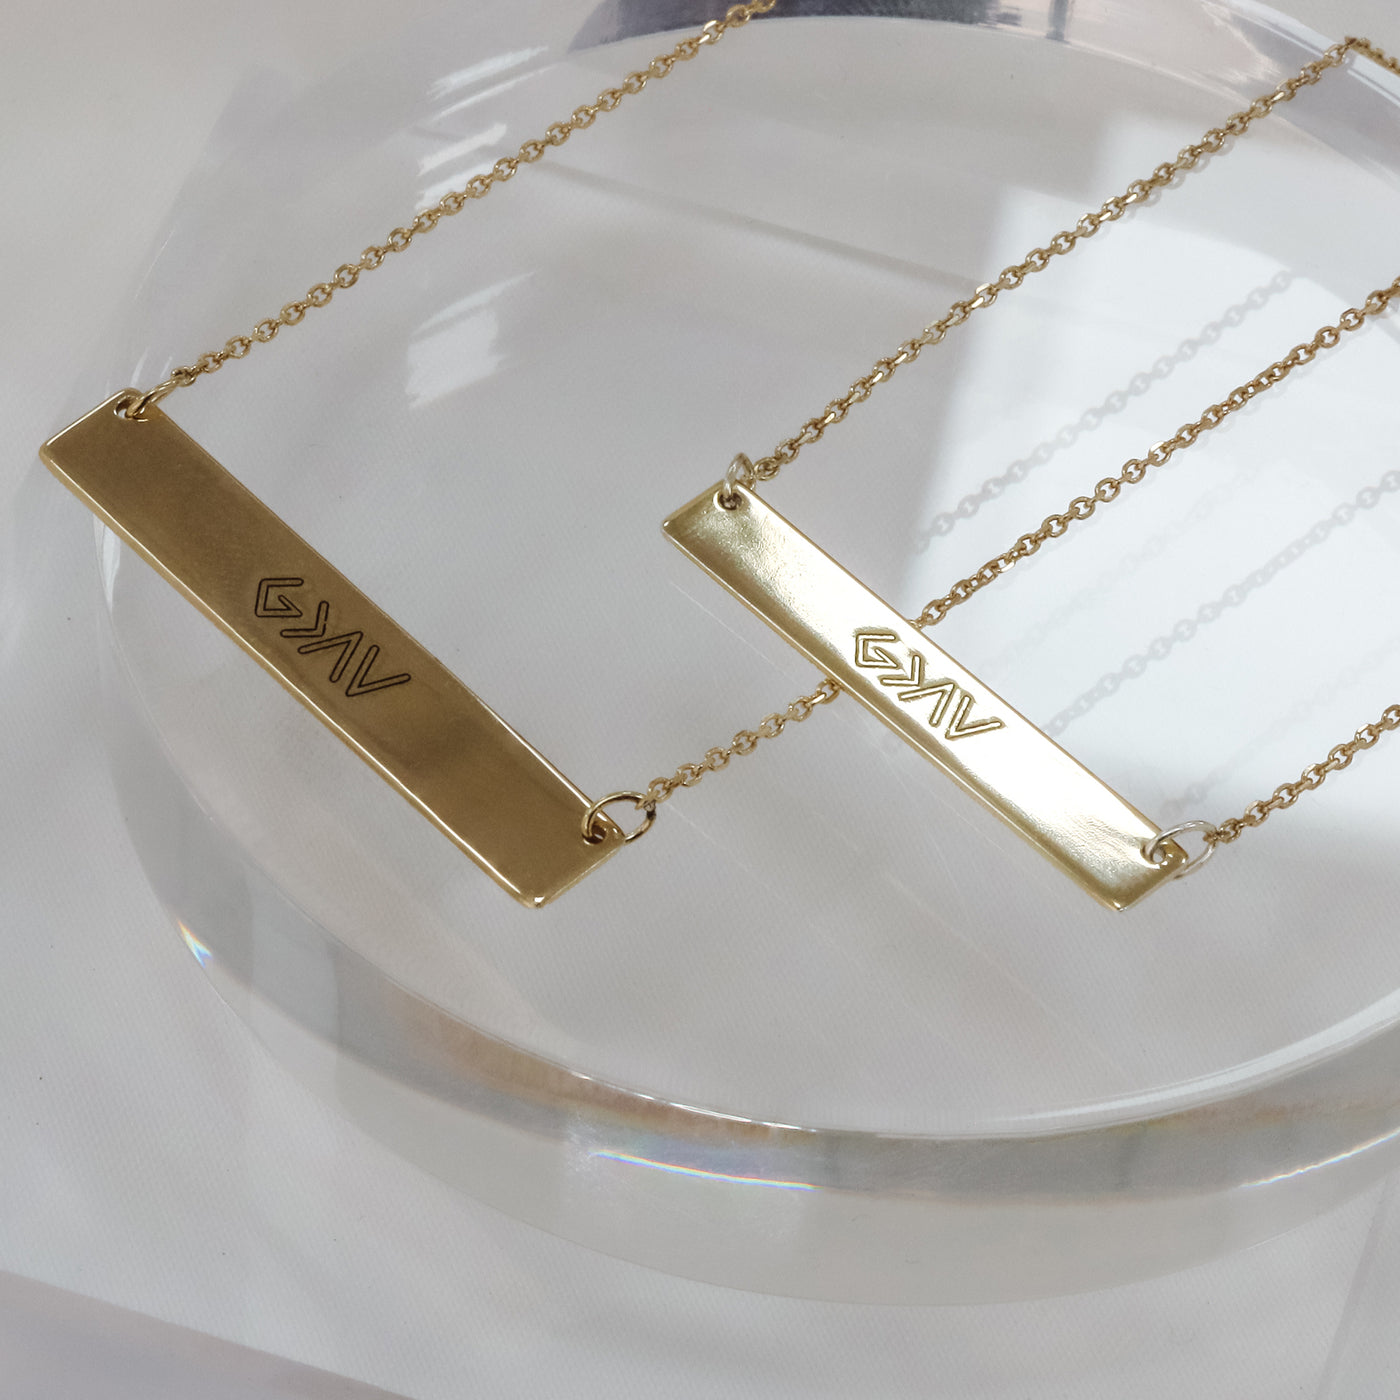 Engraved "God Is Greater Than The Highs And Lows" Pendant | Small - Gloria Jewels